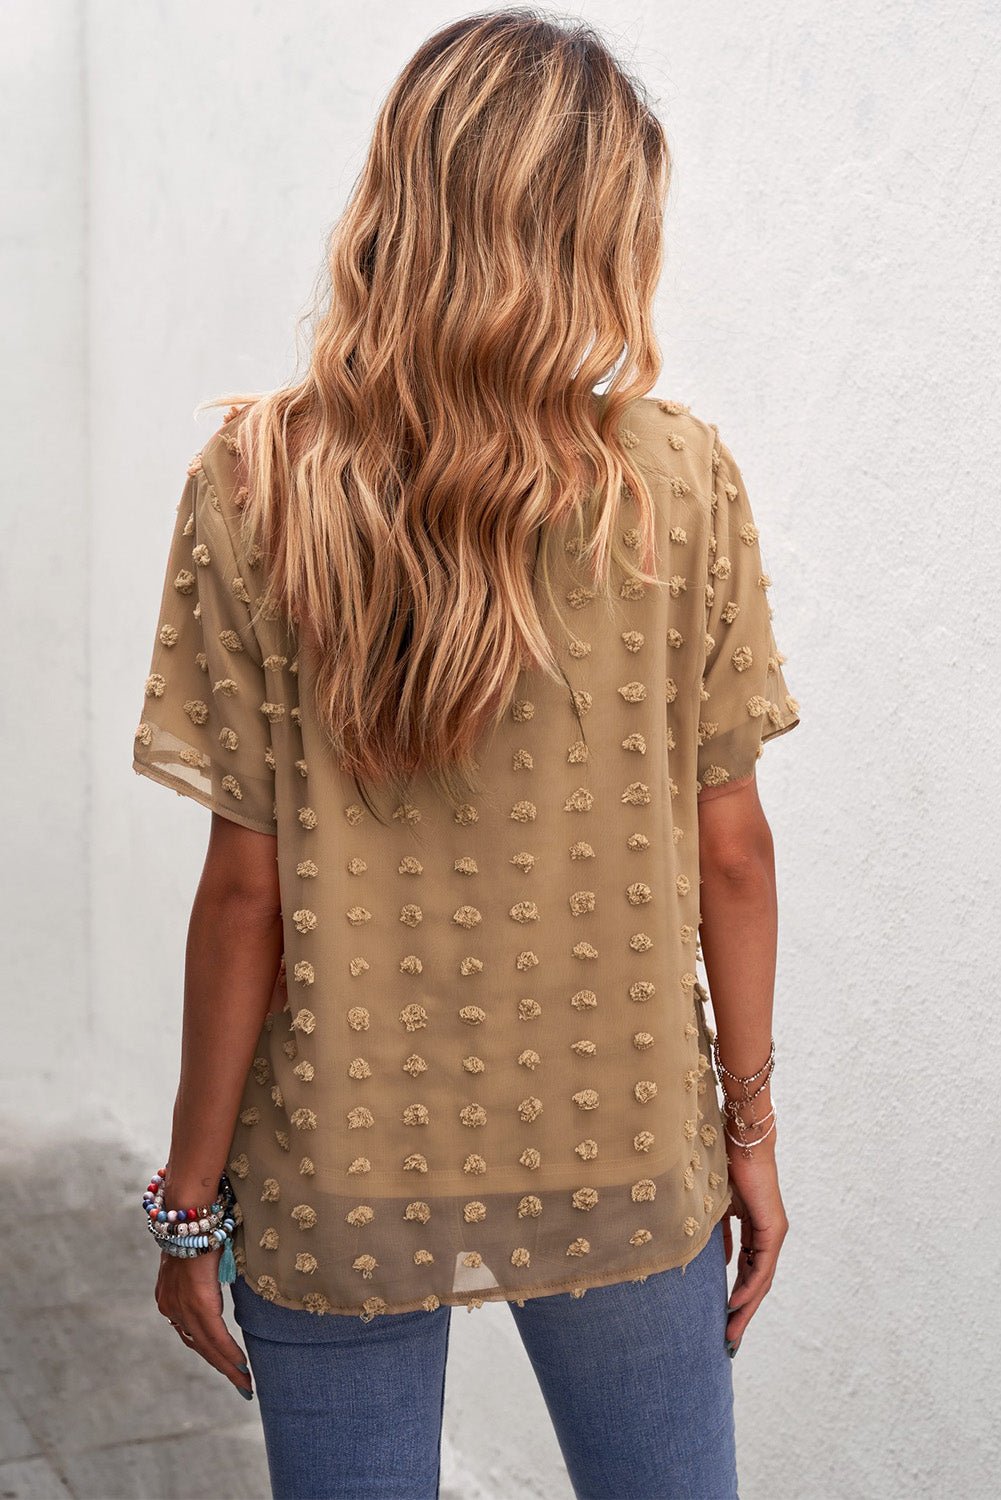 Polka Dot Sheer Blouse - tan blouse with polka dots that has short sleeves and a round neck. #Firefly Lane Boutique1